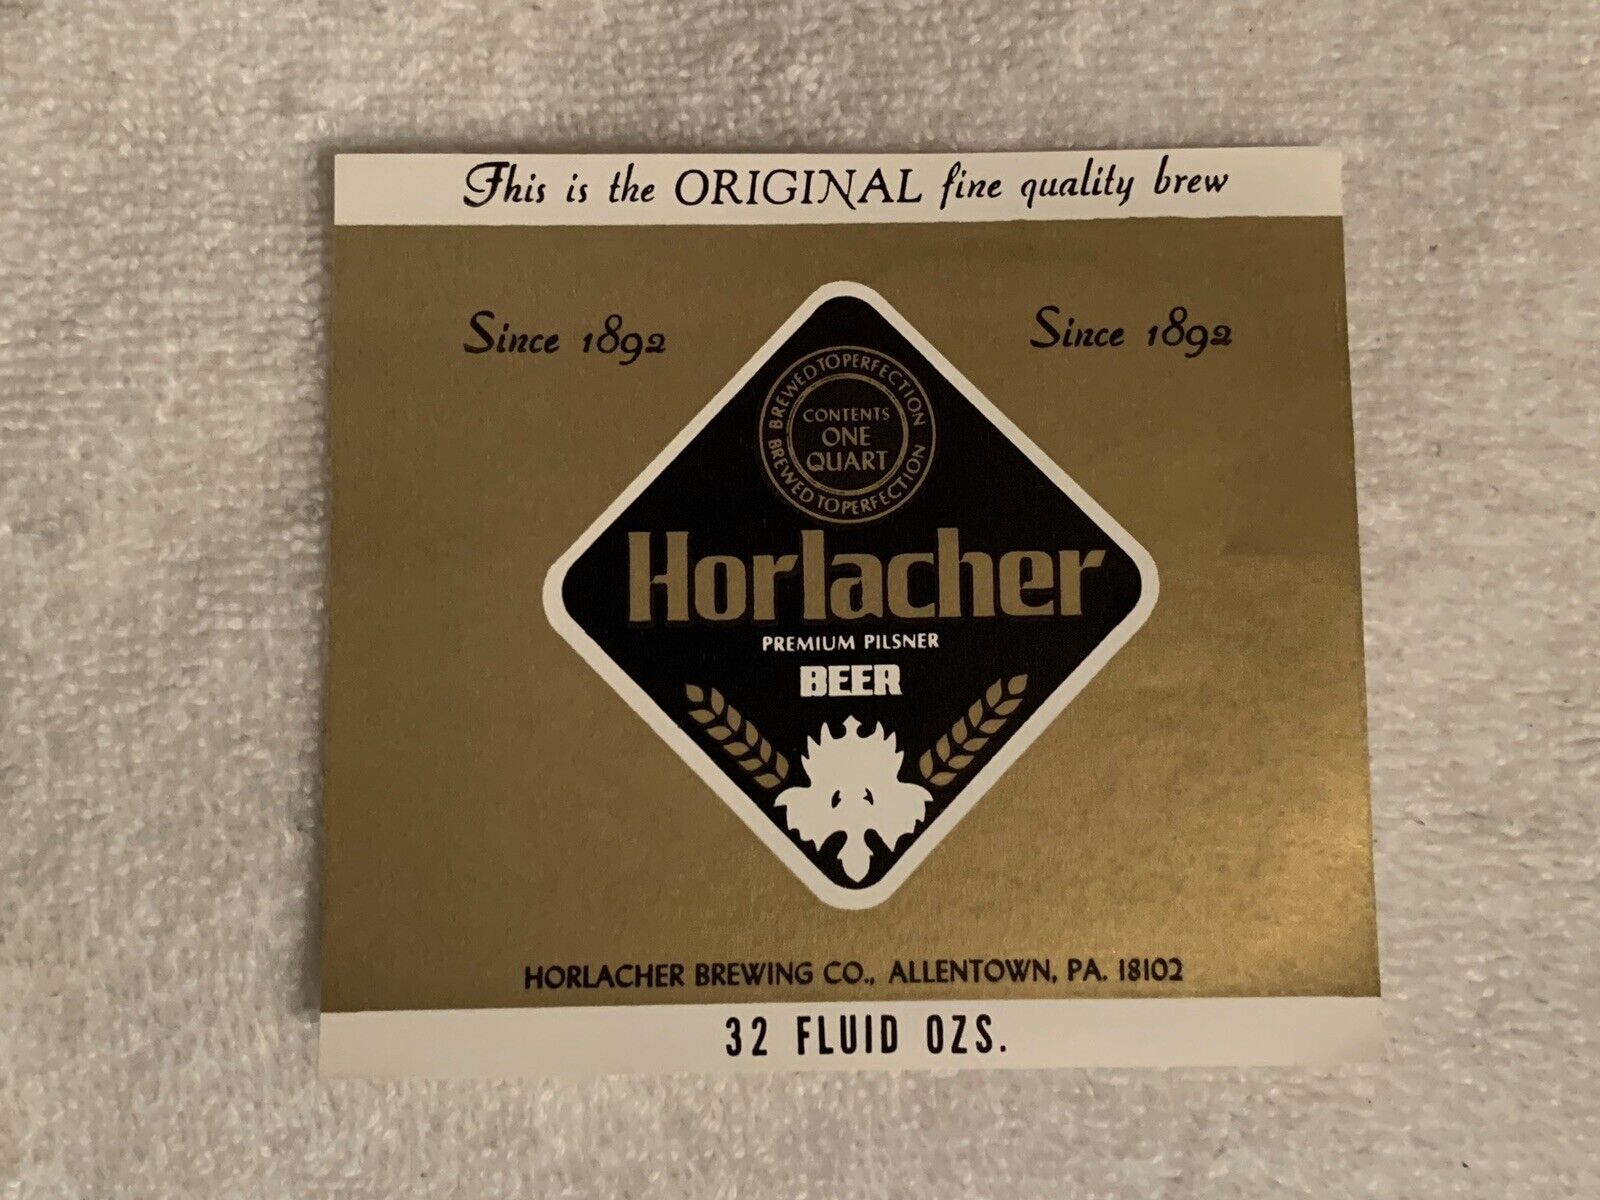 Primary image for HORLACHER PREMIUM PILSNER  BEER LABEL  32 fl oz  Great condition!!  See Pics!!!